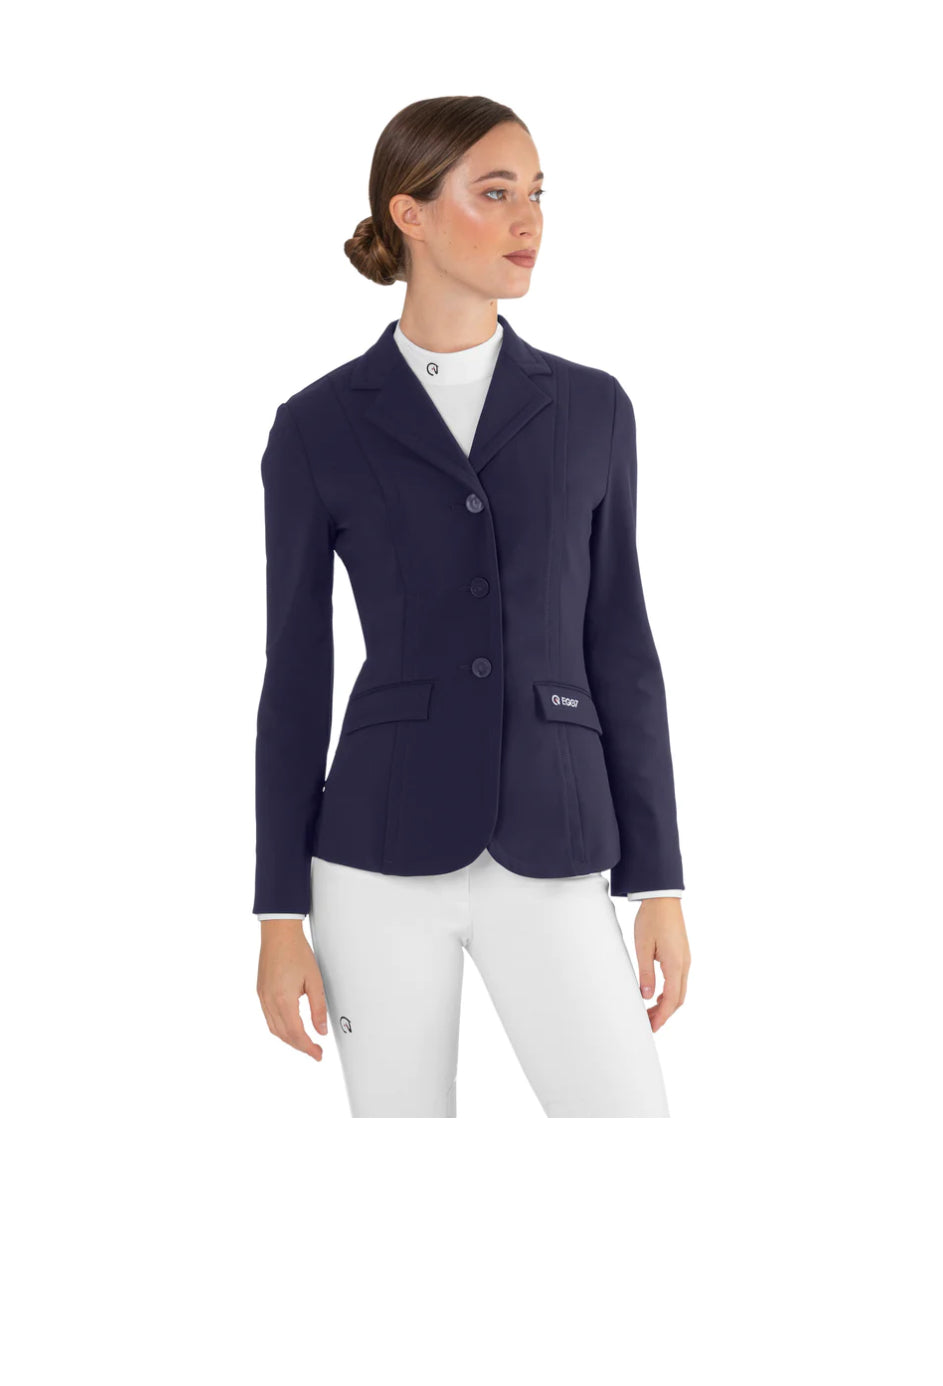 EGO 7 BE AIR WOMEN SHOW JACKET